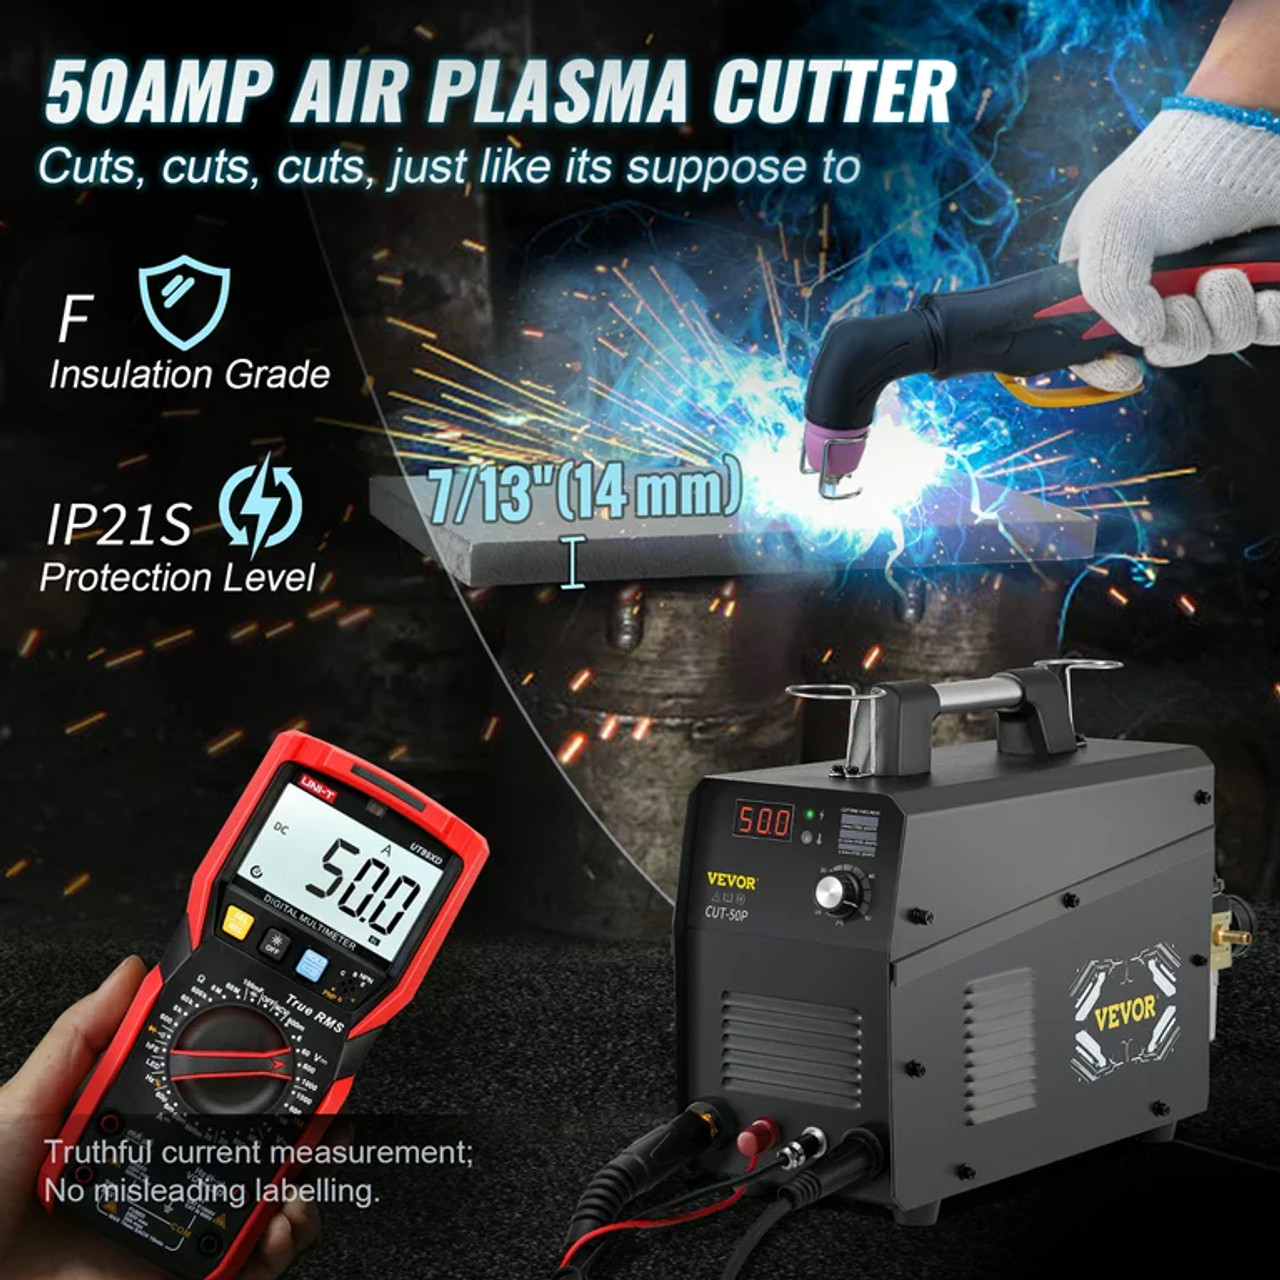 Plasma Cutter, 50Amp, Non-Touch Pilot Arc Air Cutting Machine with Torch, 110V/220V Dual Voltage AC IGBT Inverter Metal Cutting Equipment for 1/2"